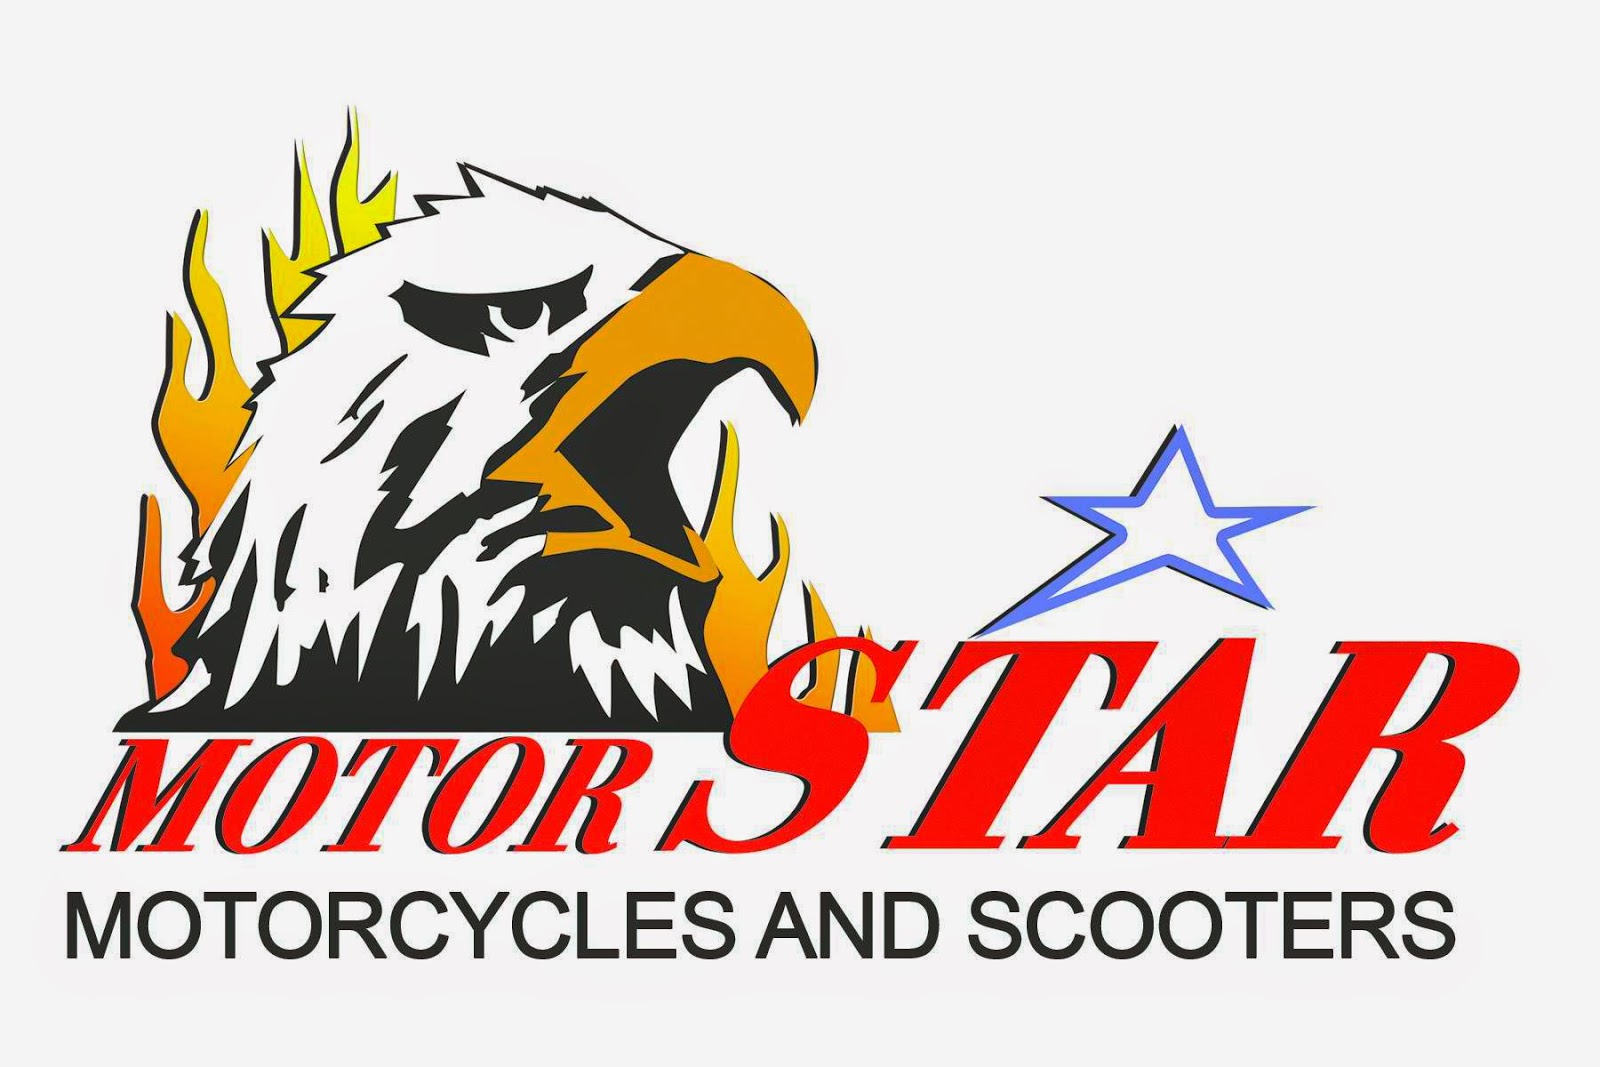 Motorcycle Brands Philippines Logo  . Here You Will Also Find The Most Searched Bike Models Across Different Segments.